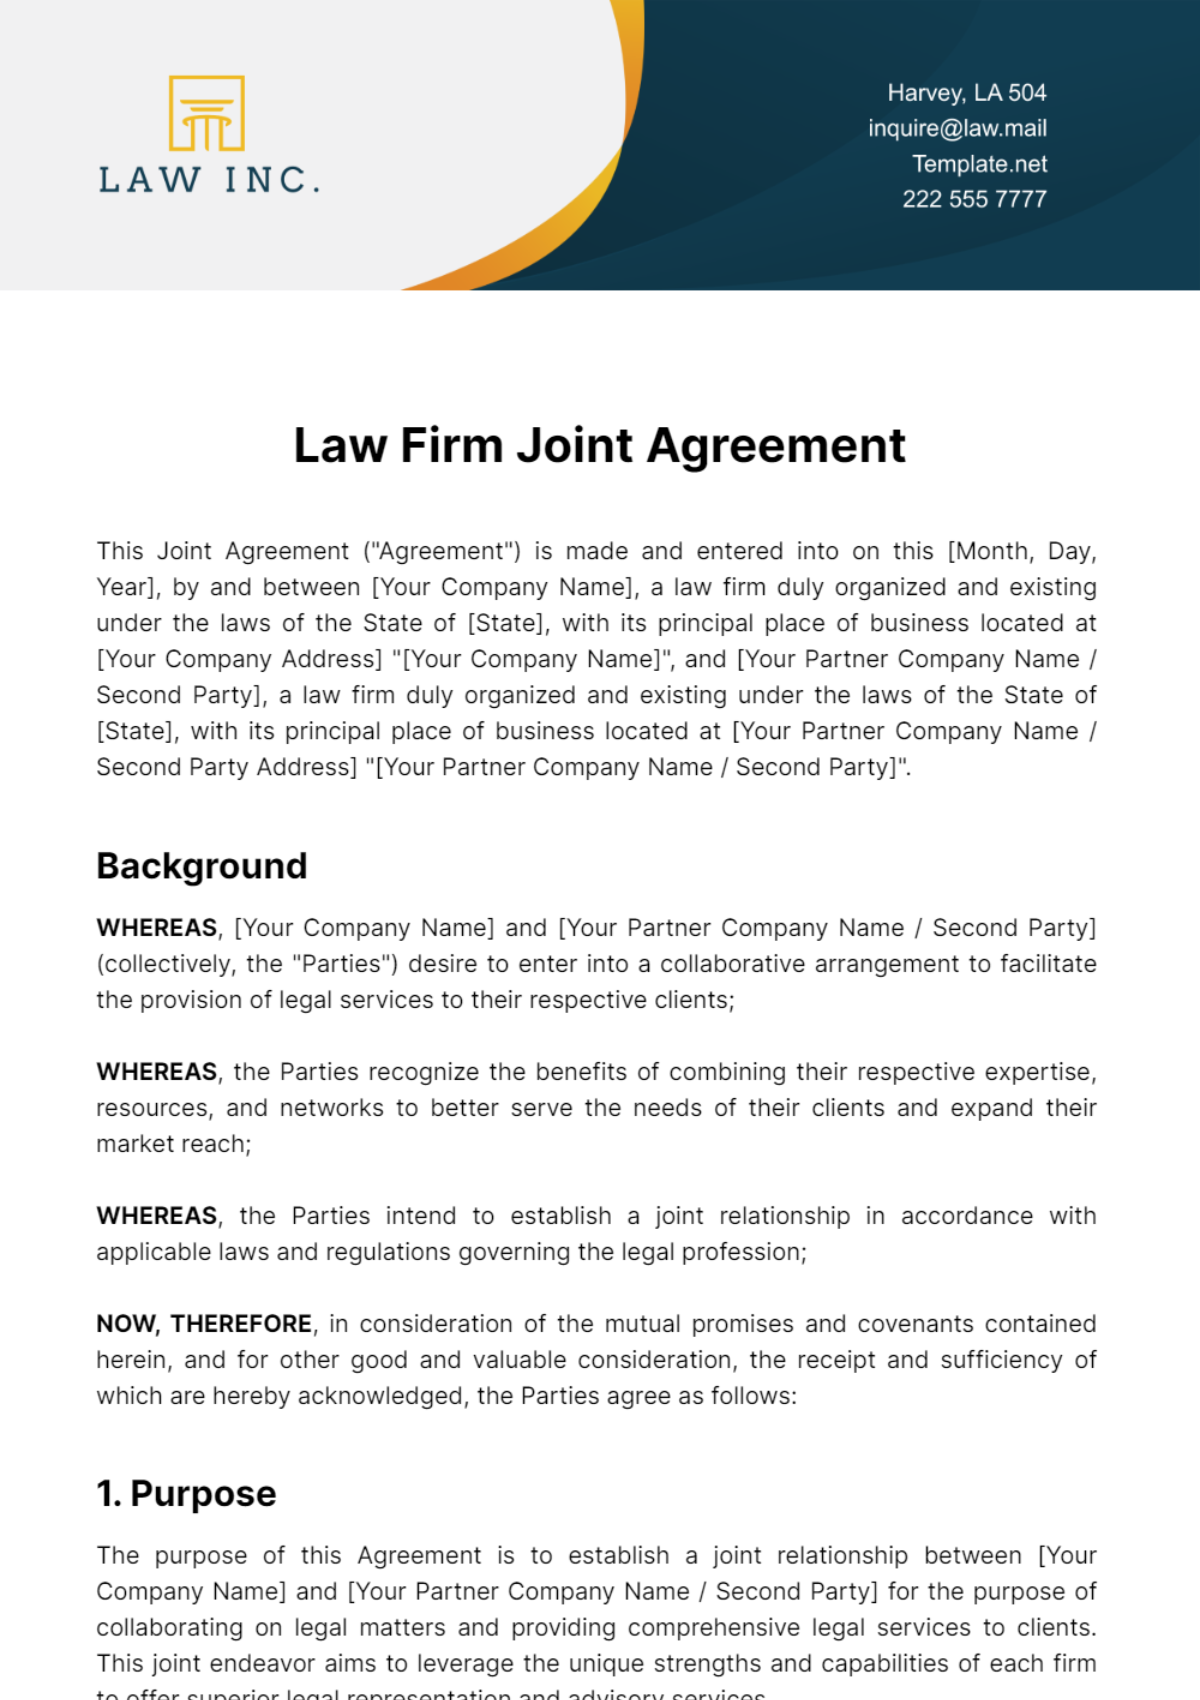 Law Firm Joint Agreement Template